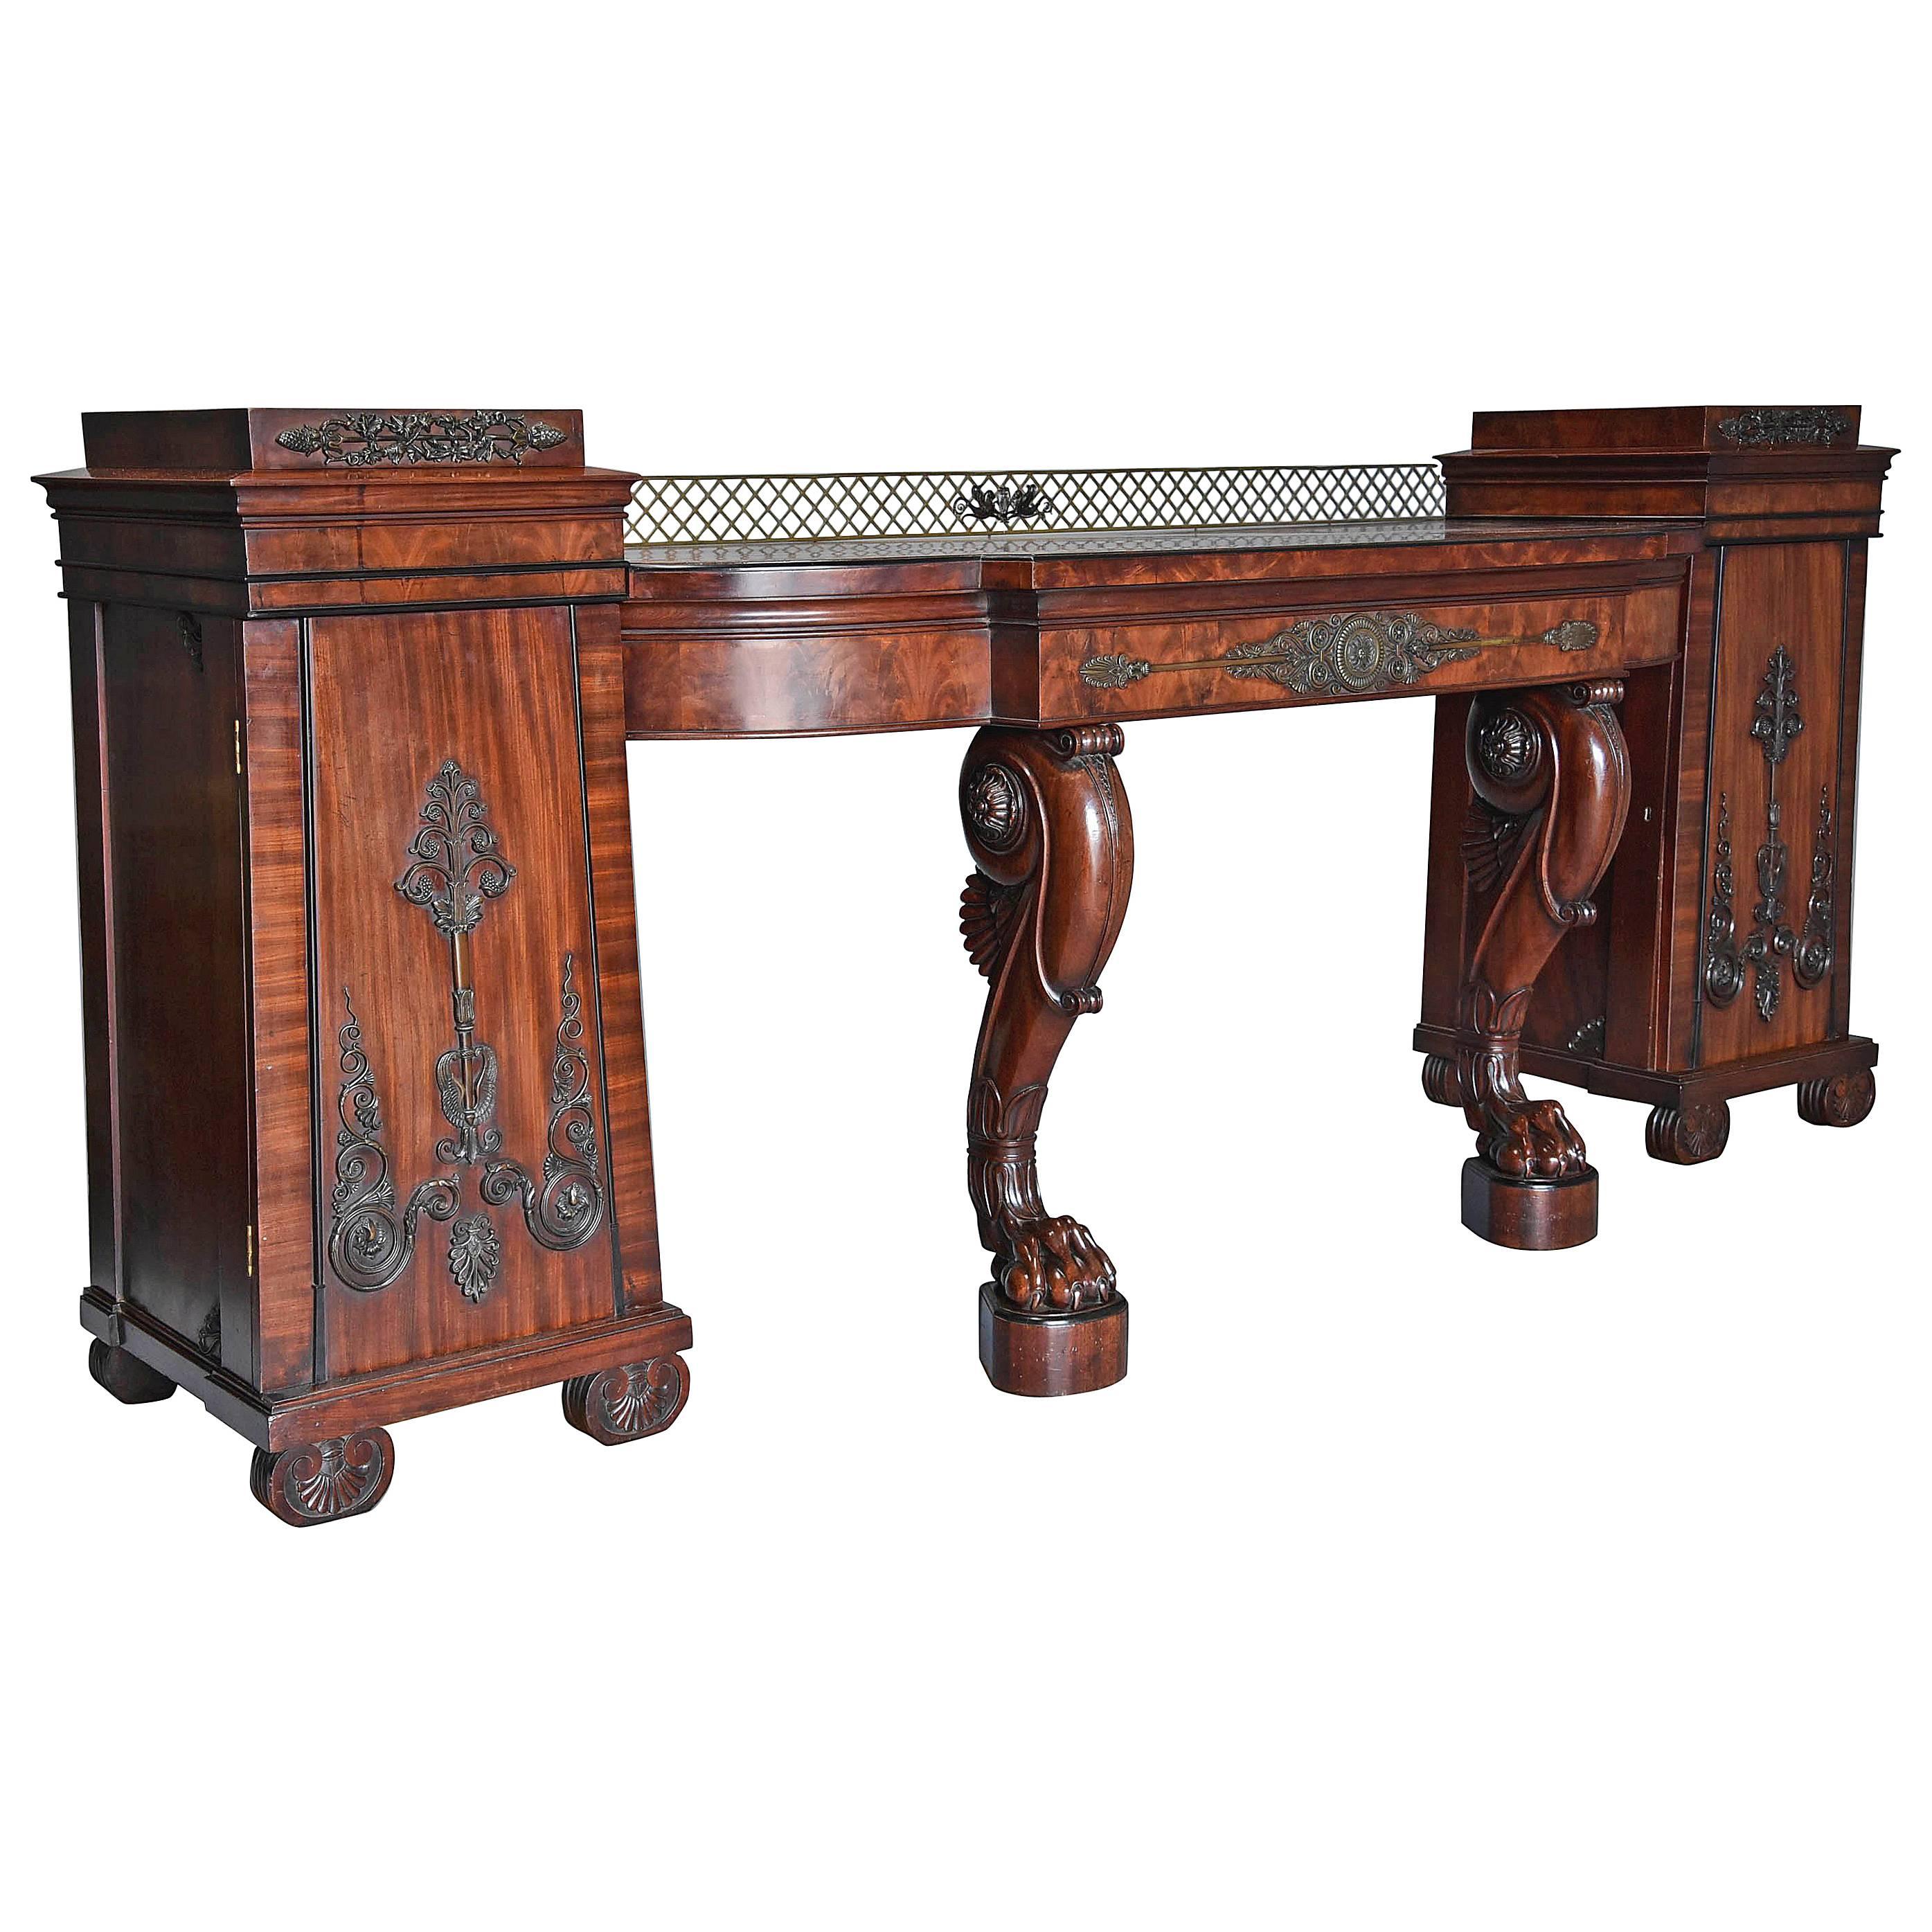 Superb Quality and Rare Regency Mahogany Sideboard in the Manner of Thomas Hope For Sale